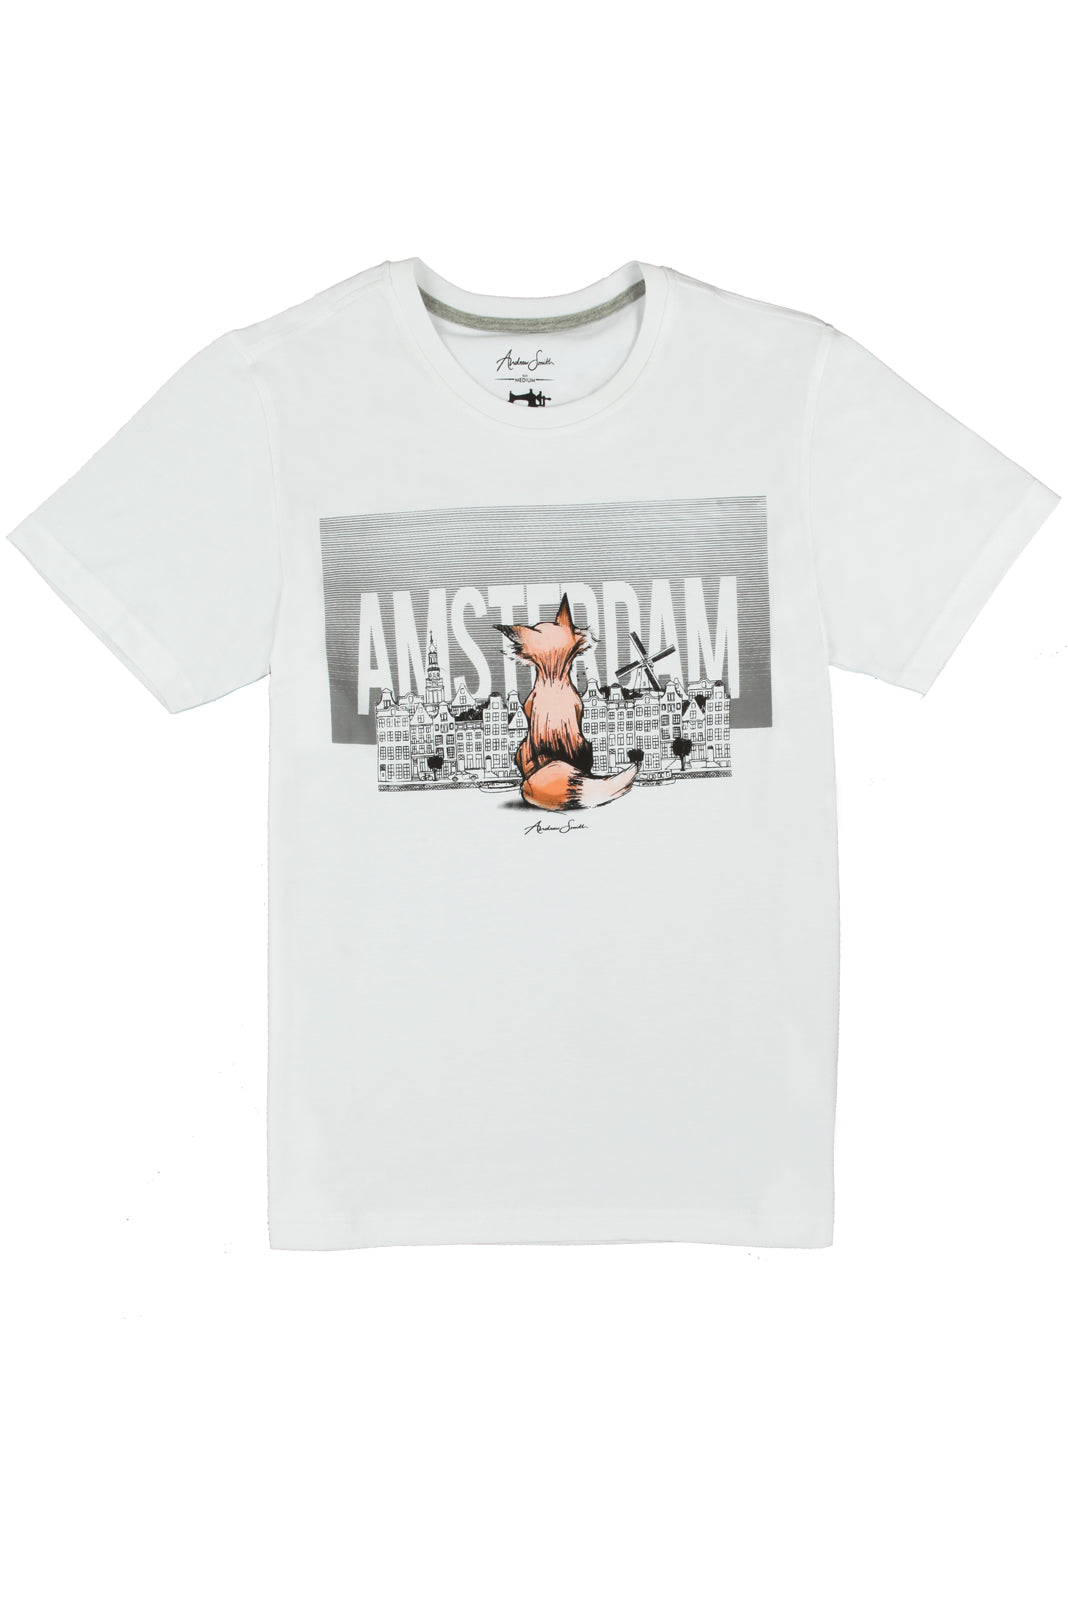 Andrew Smith T-Shirt Slim Fit Pria A0078P08D